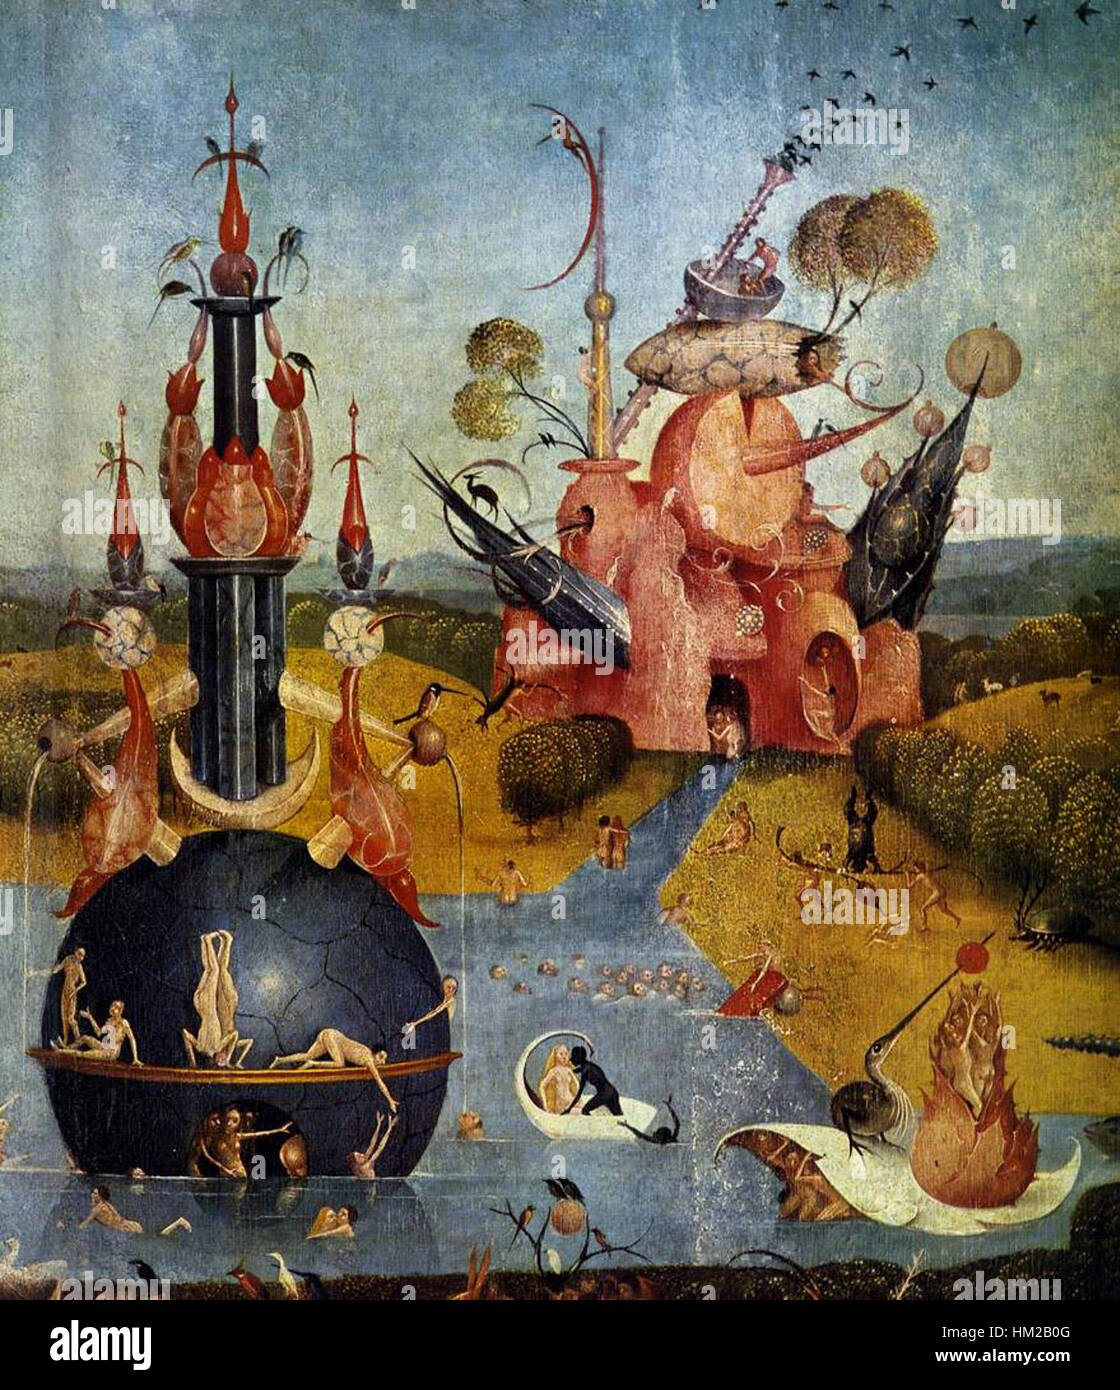 Hieronymus Bosch Triptych Of Garden Of Earthly Delights Detail